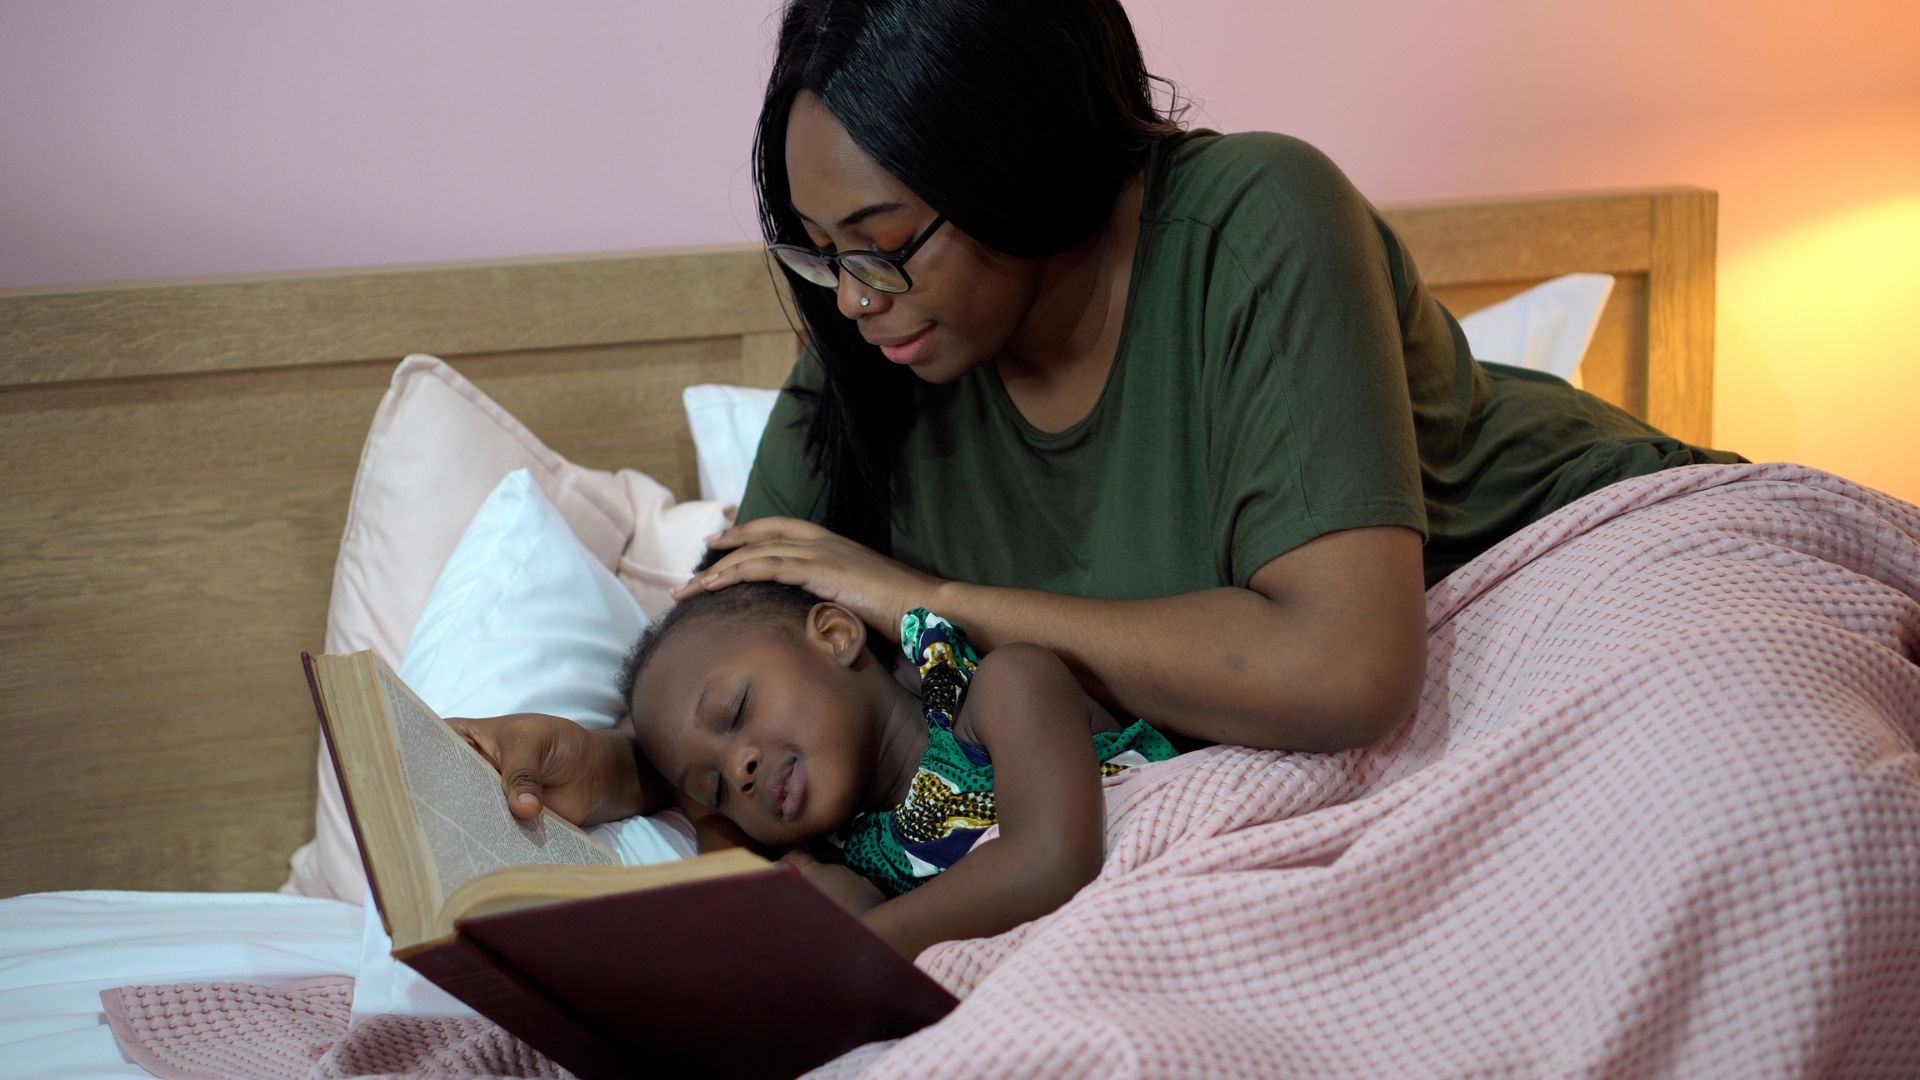 The Importance of Reading Books to Your Baby